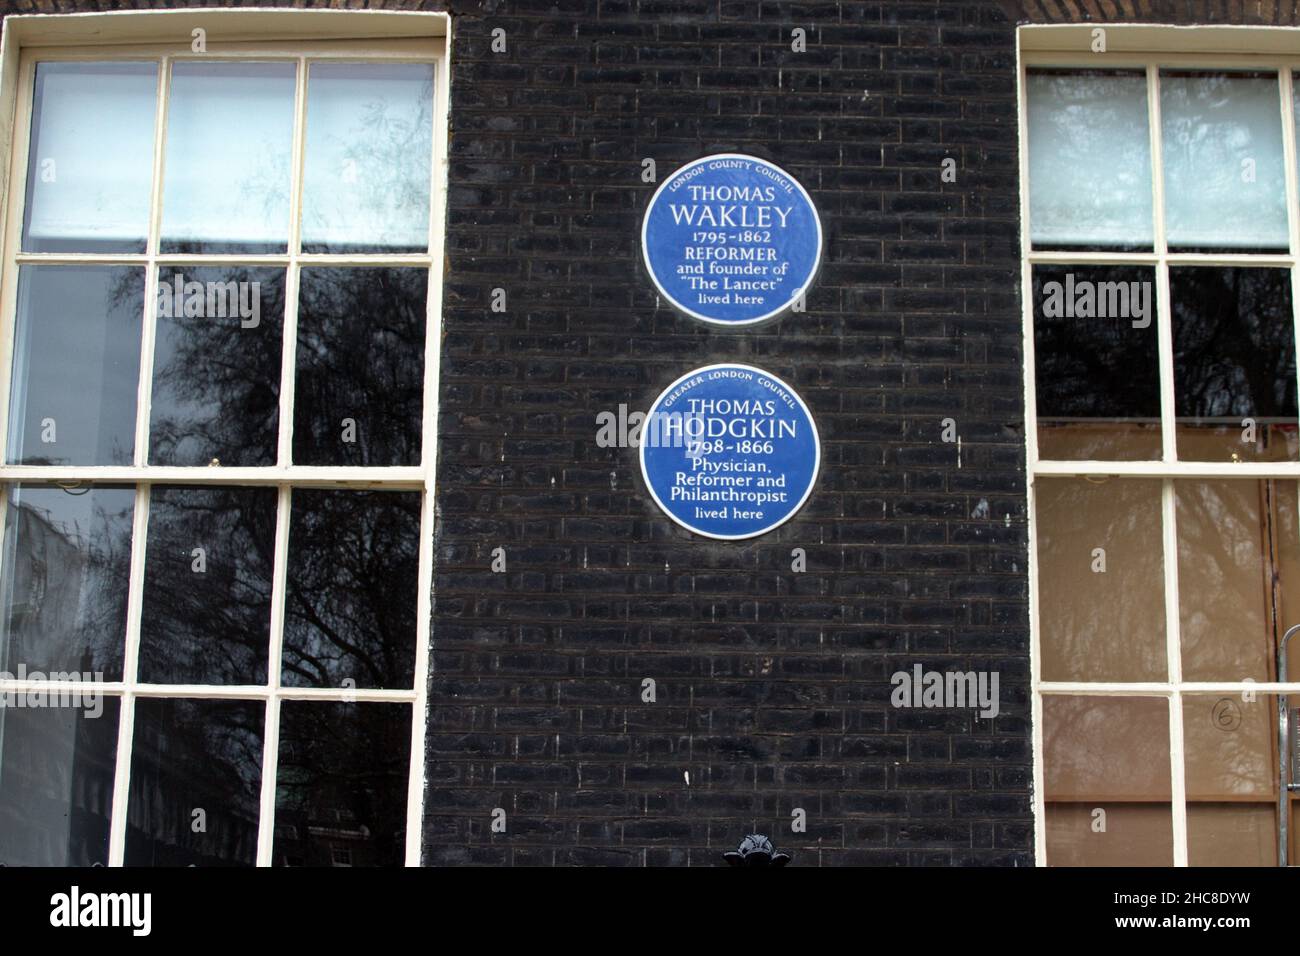 Blue Plaques on the wall of the former home of Thomas akley and Thomas Hodgkin. London, UK. Stock Photo